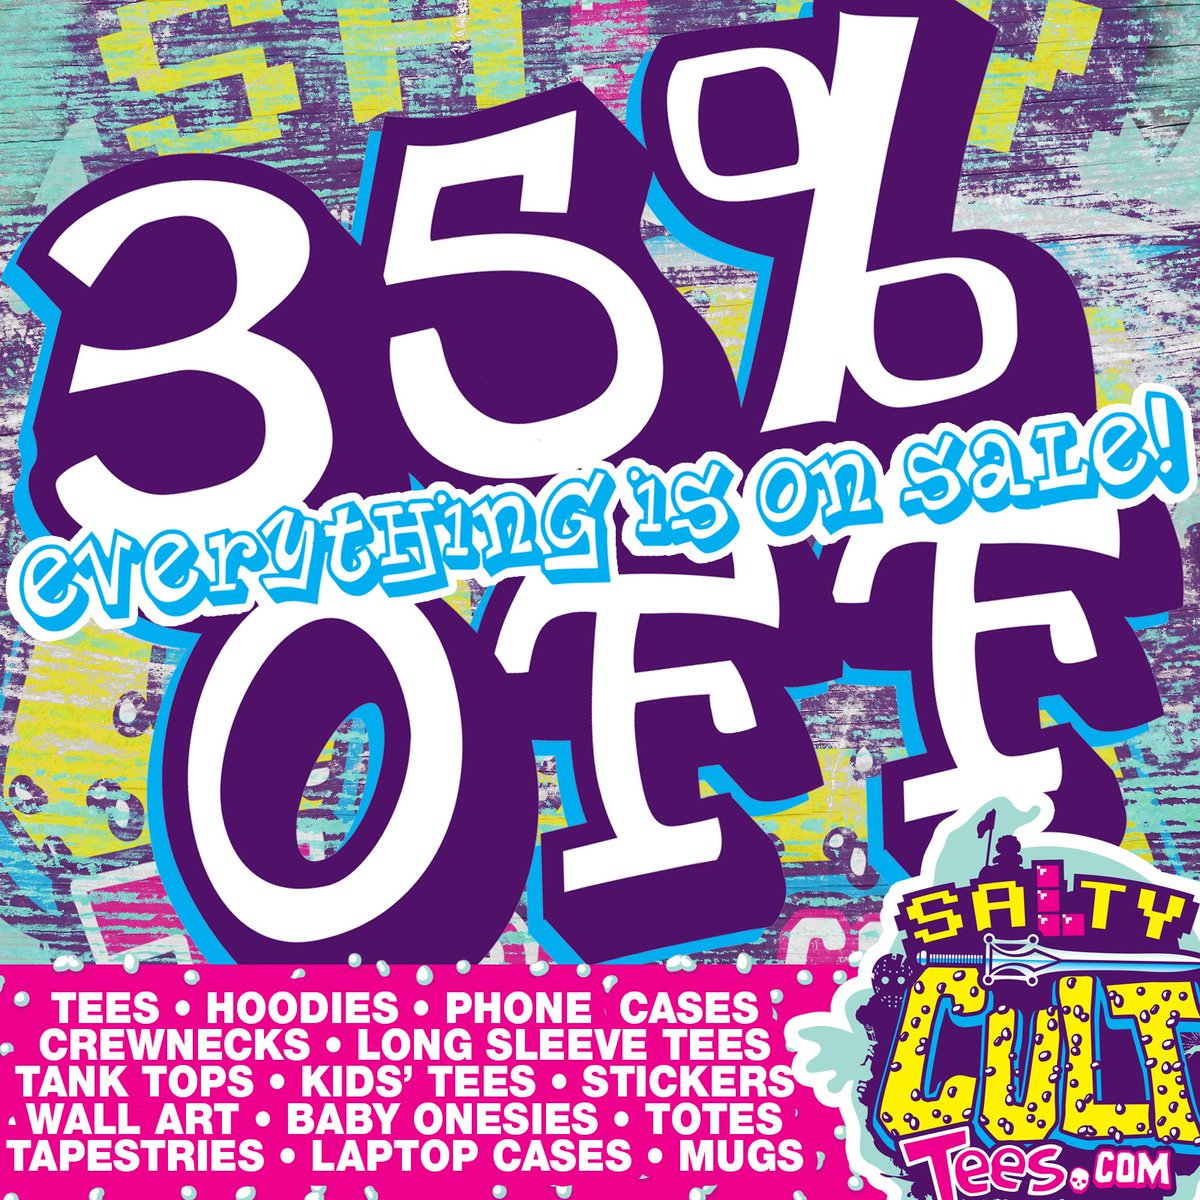 35% OFF teepublic.com/user/saltycult #Apparel #Posters #Stationary #Mugs #PhoneCases #Stickers #SaltyCultTees #tshirts #movies #noveltyshirts